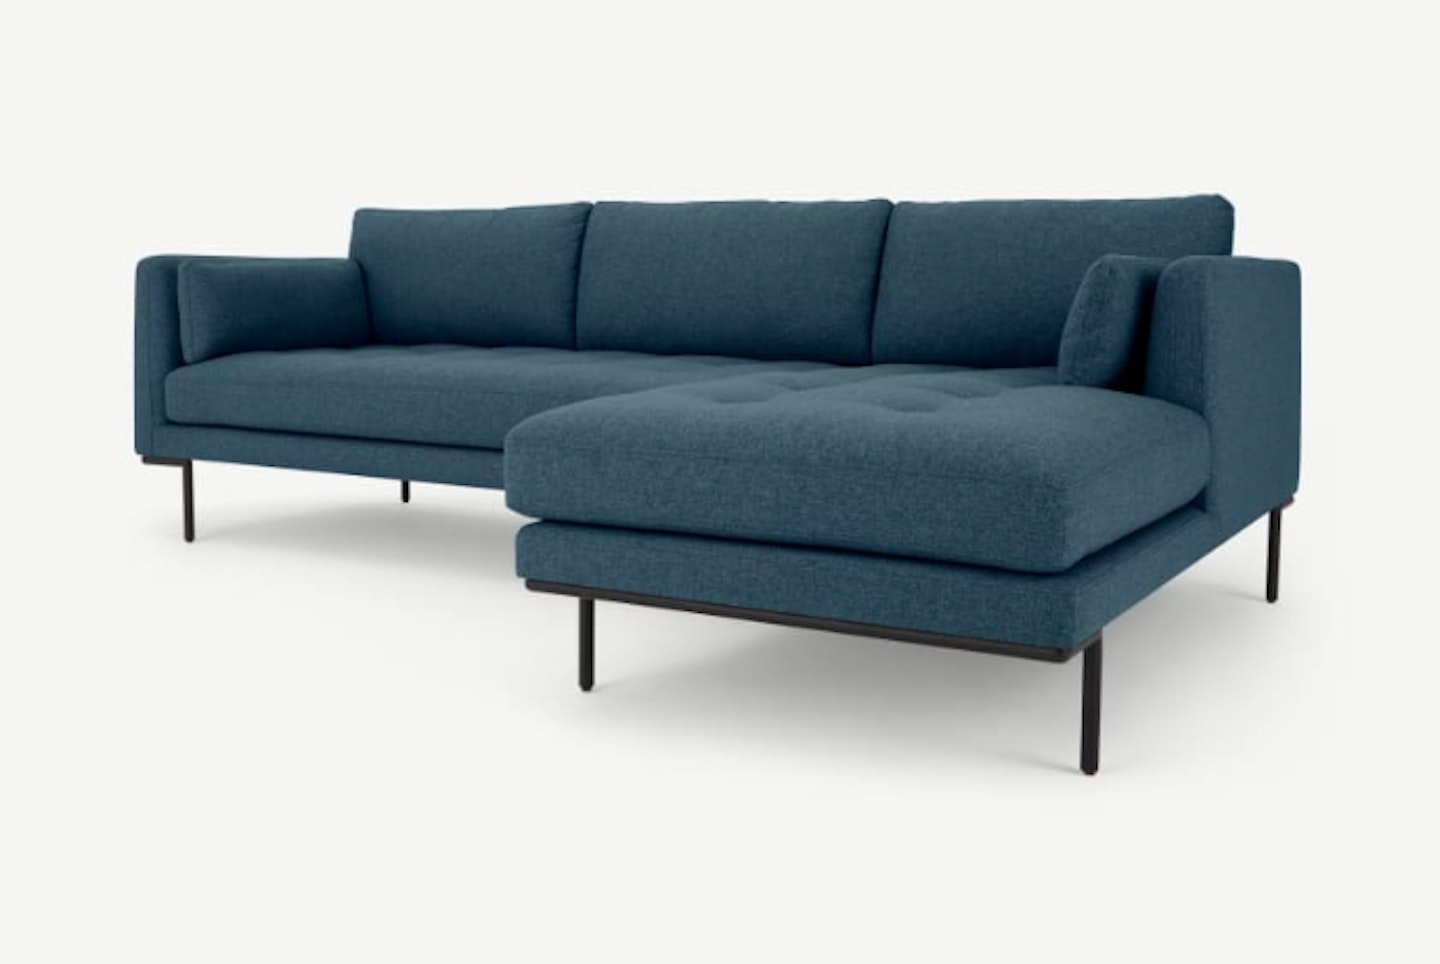 MADE, Harlow Right Hand Facing Chaise End Corner Sofa, Orleans Blue, £1,150